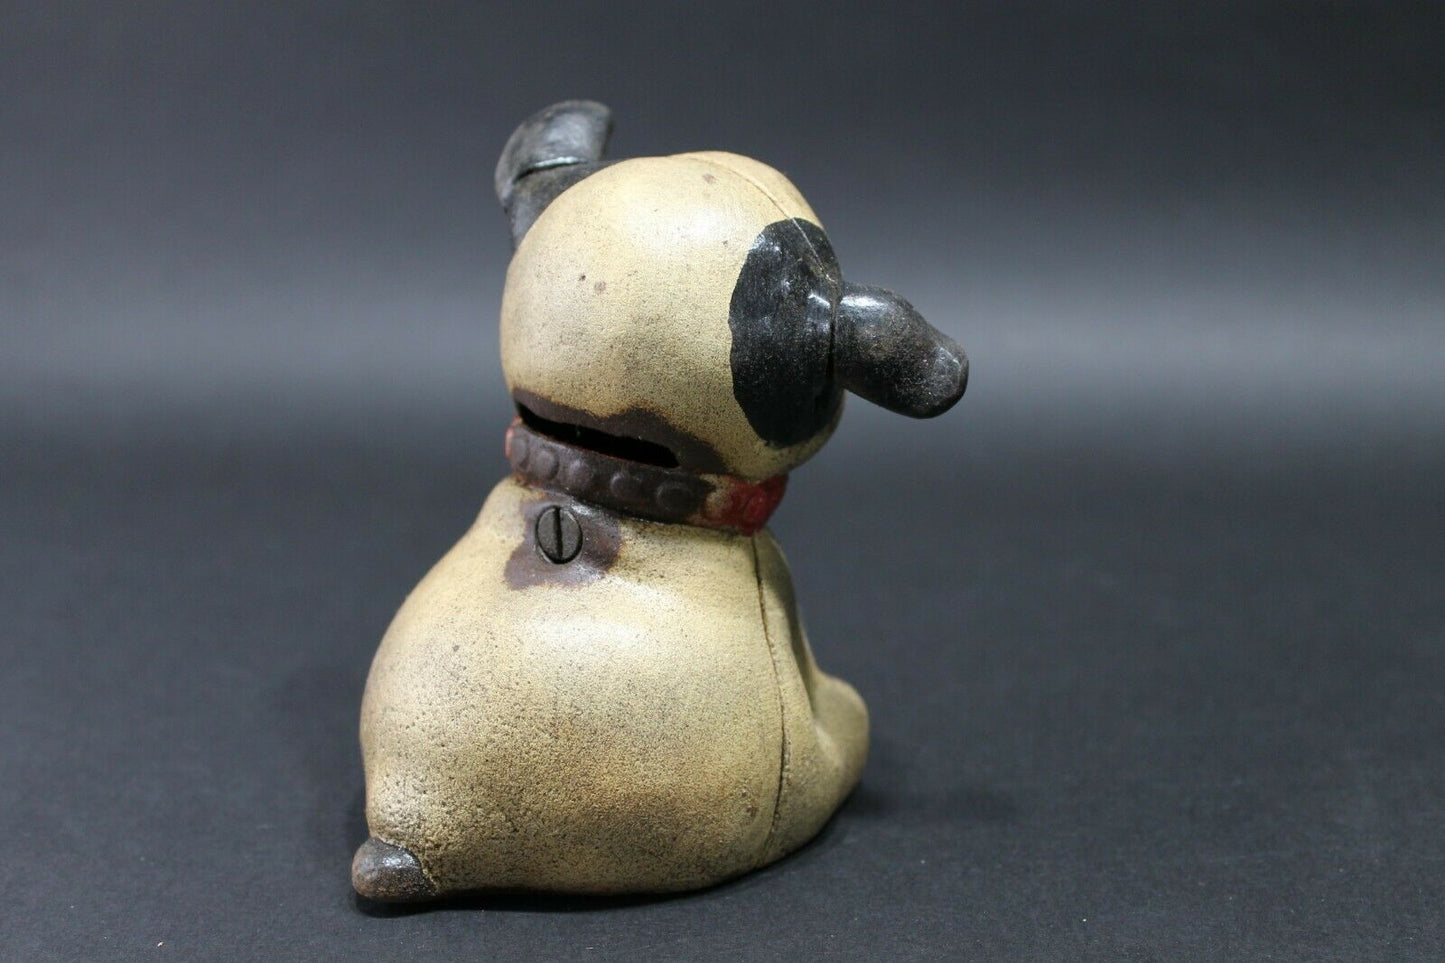 Antique Vintage Style Cast Iron Fido Dog Coin Bank - Early Home Decor